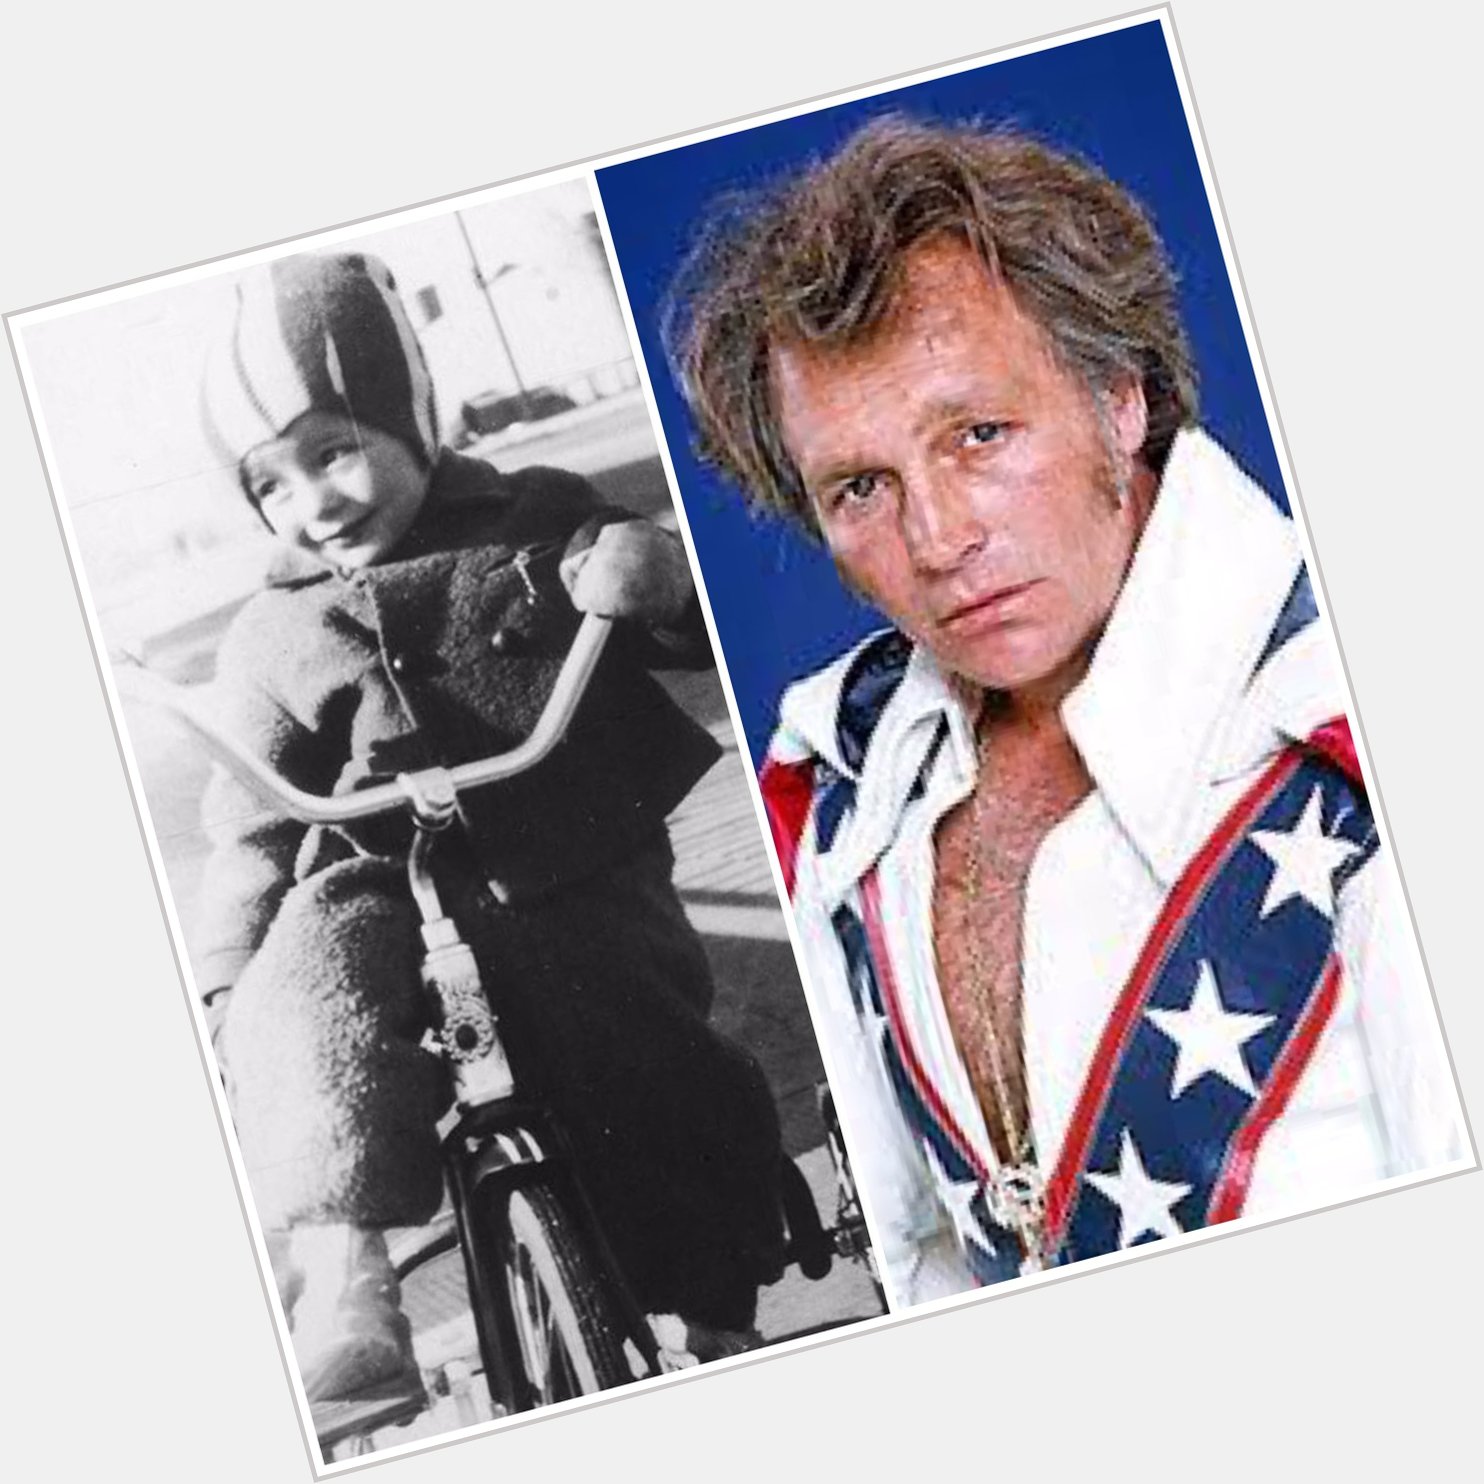 Happy Birthday! Evel Knievel would have been 81 today. The worlds original & greatest motorcycle daredevil.  